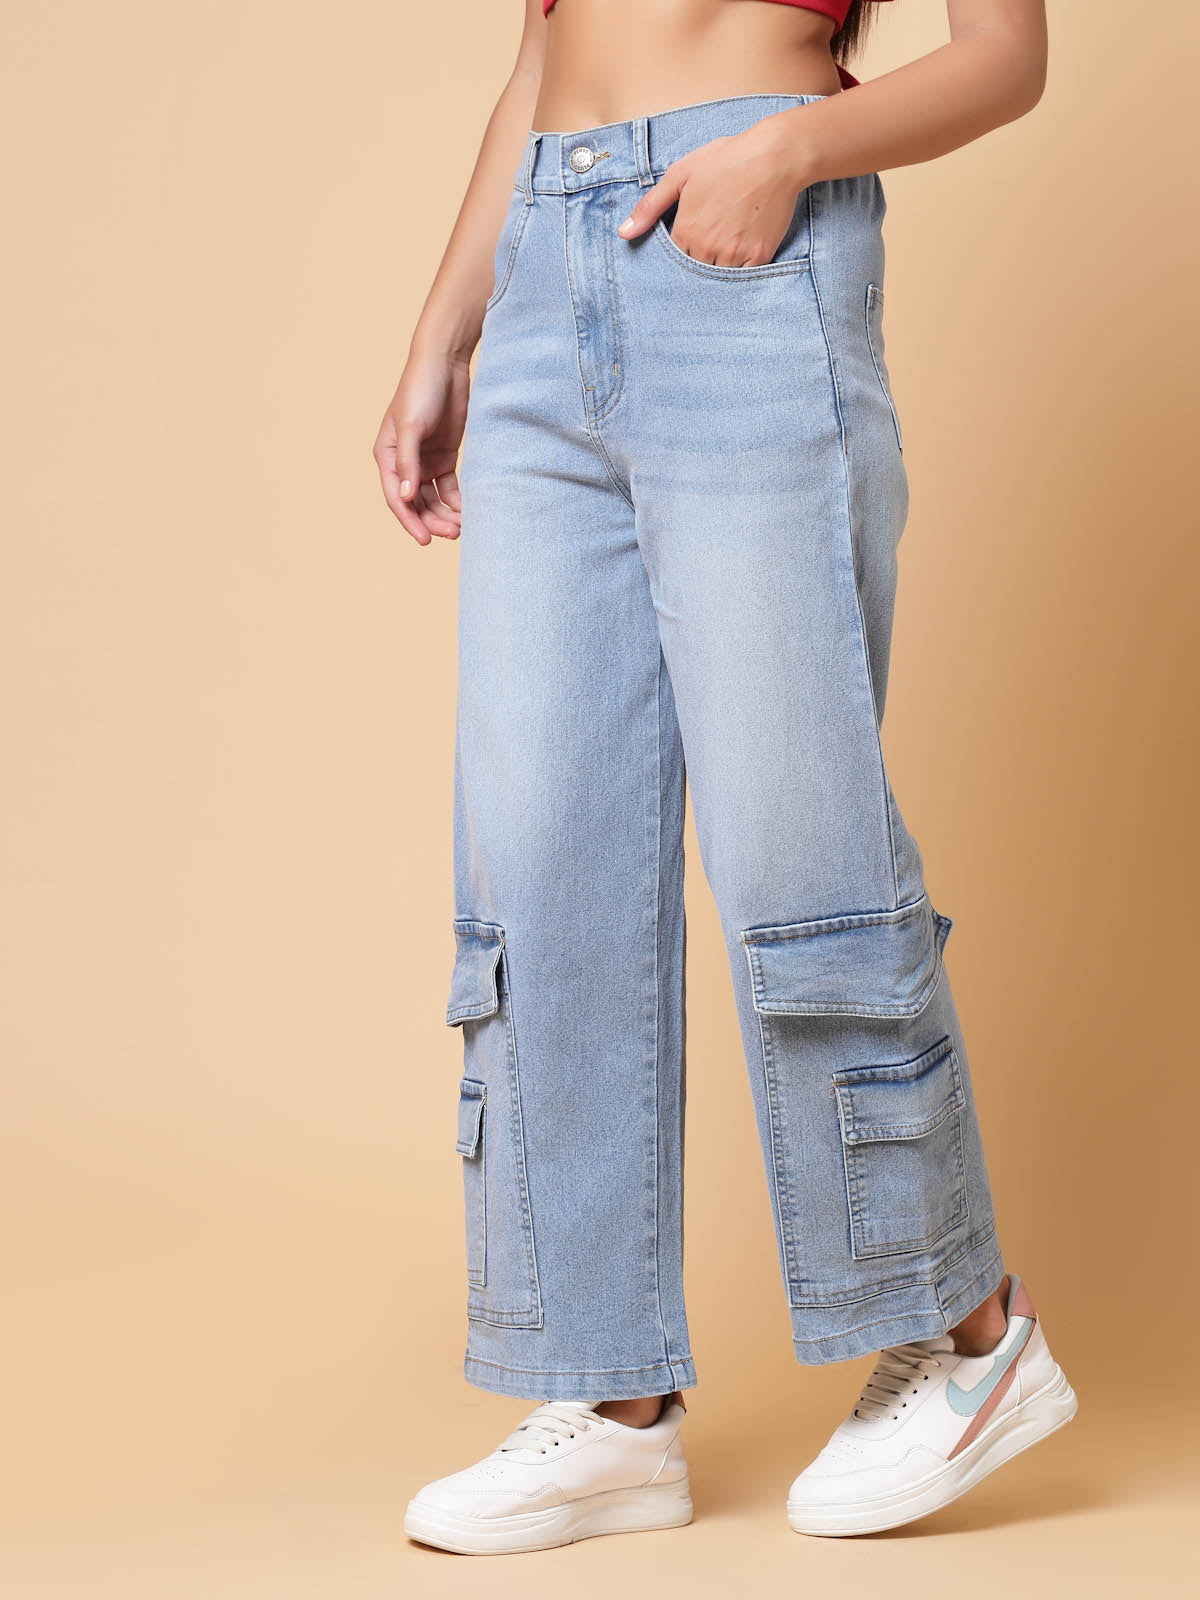 Korean Sweet Heavy Industry Primark Mom Jeans With Beads, Diamond Bow,  Split Flared, High Waist, Stretch Slim Denim Trousers Spring 2023  Collection Style #230324 From Mu04, $44.73 | DHgate.Com